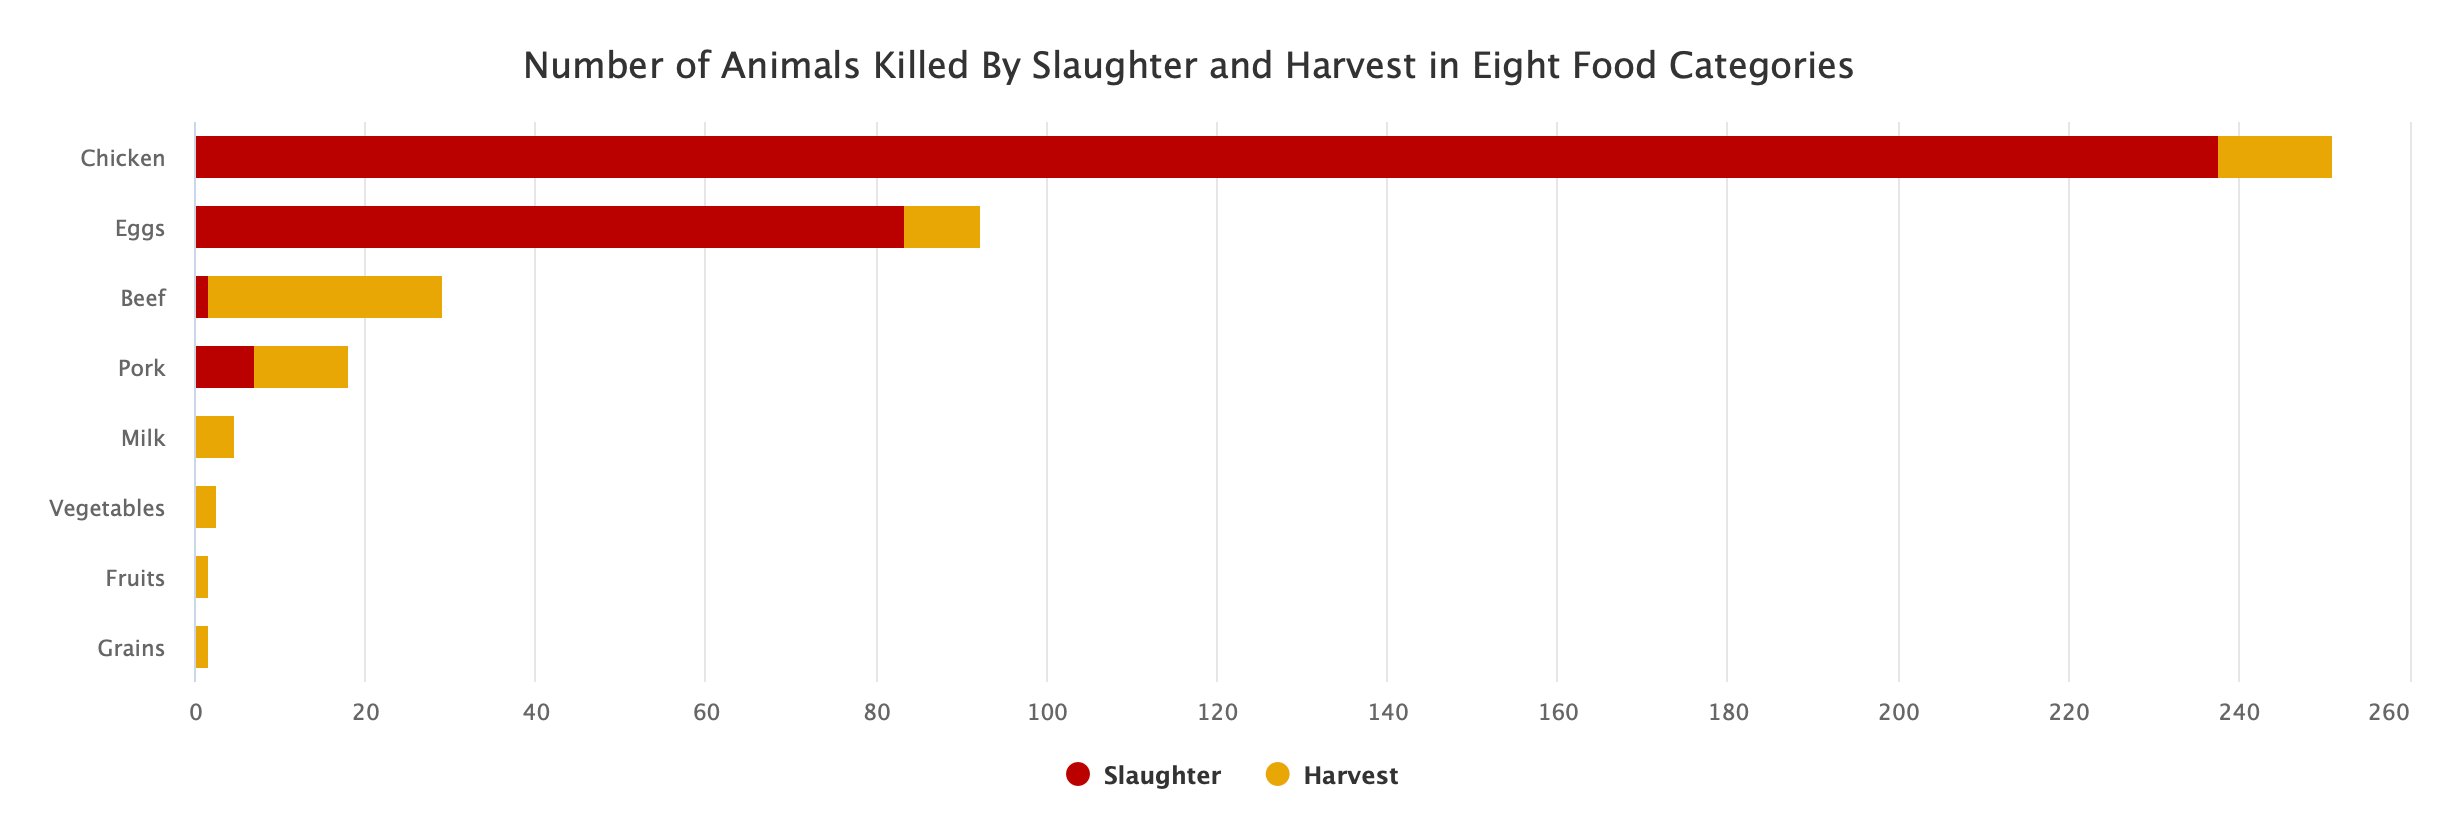 Number of Animals Killed By Slaughter and Harvest in Eight Food Categories